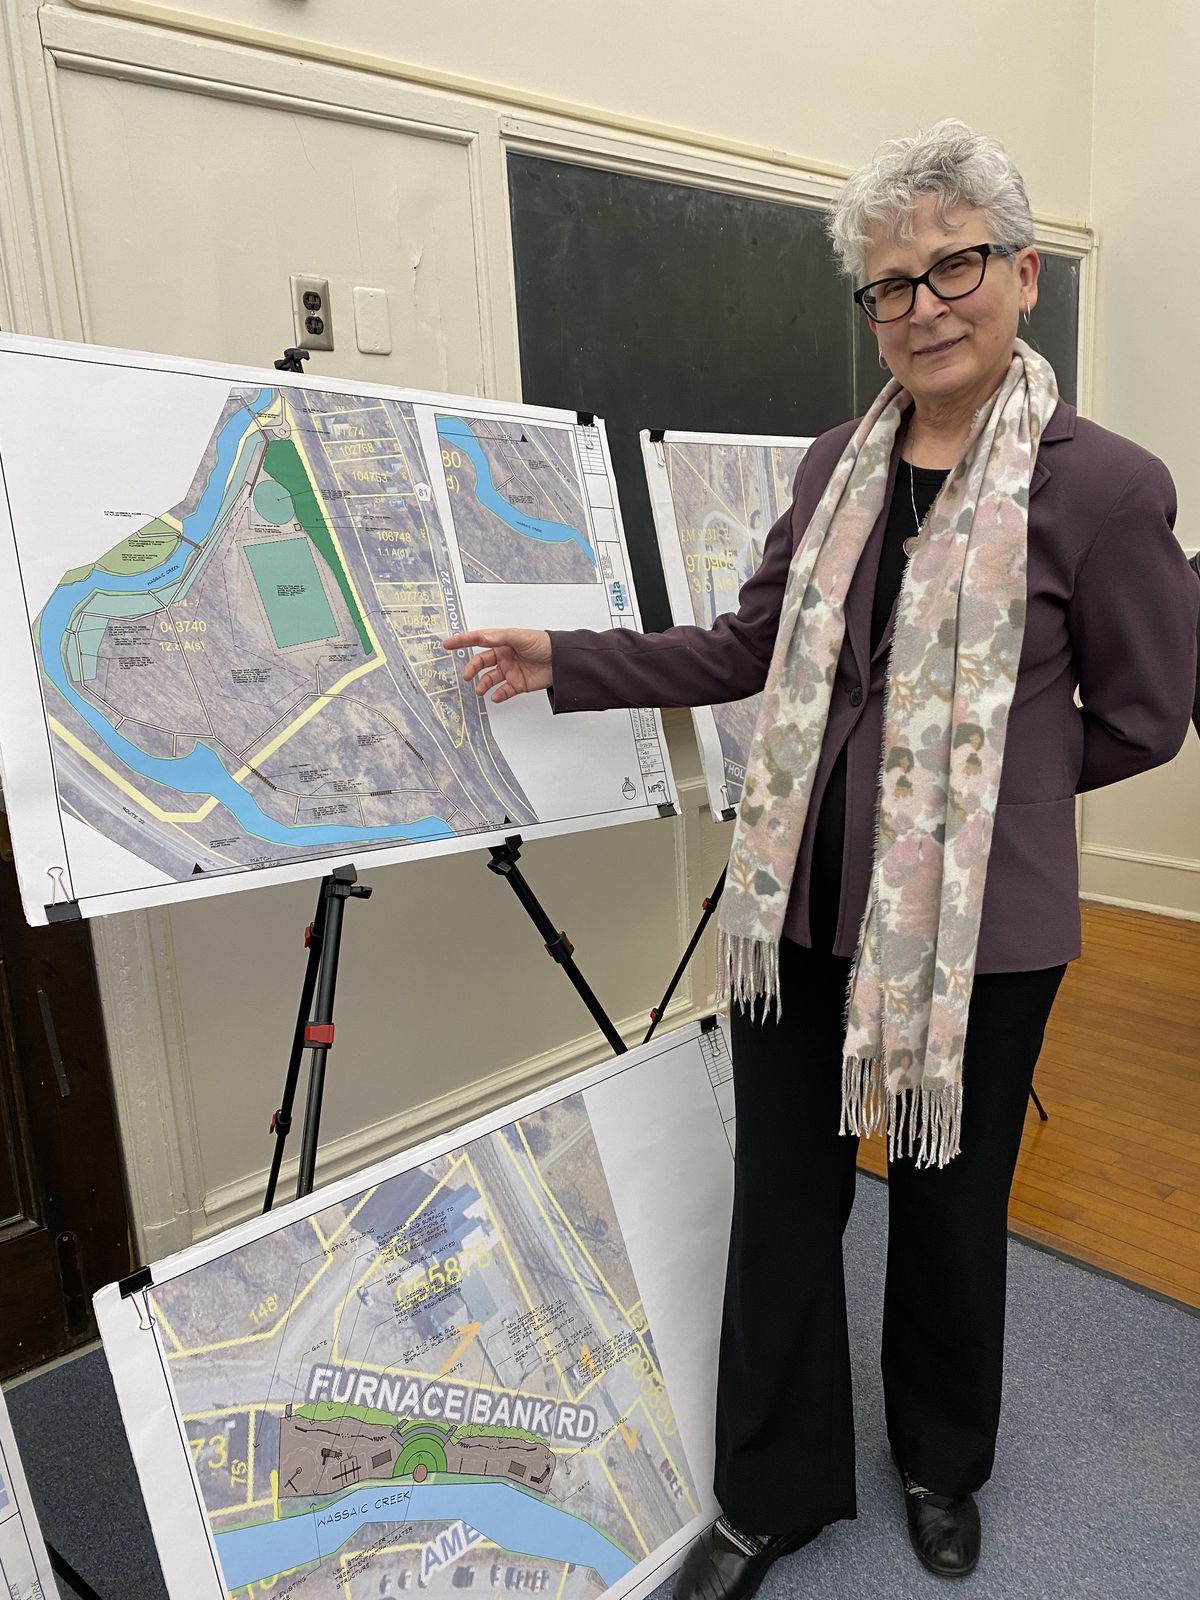 Recreation Commission unveils plans for new parks in Amenia, Wassiac